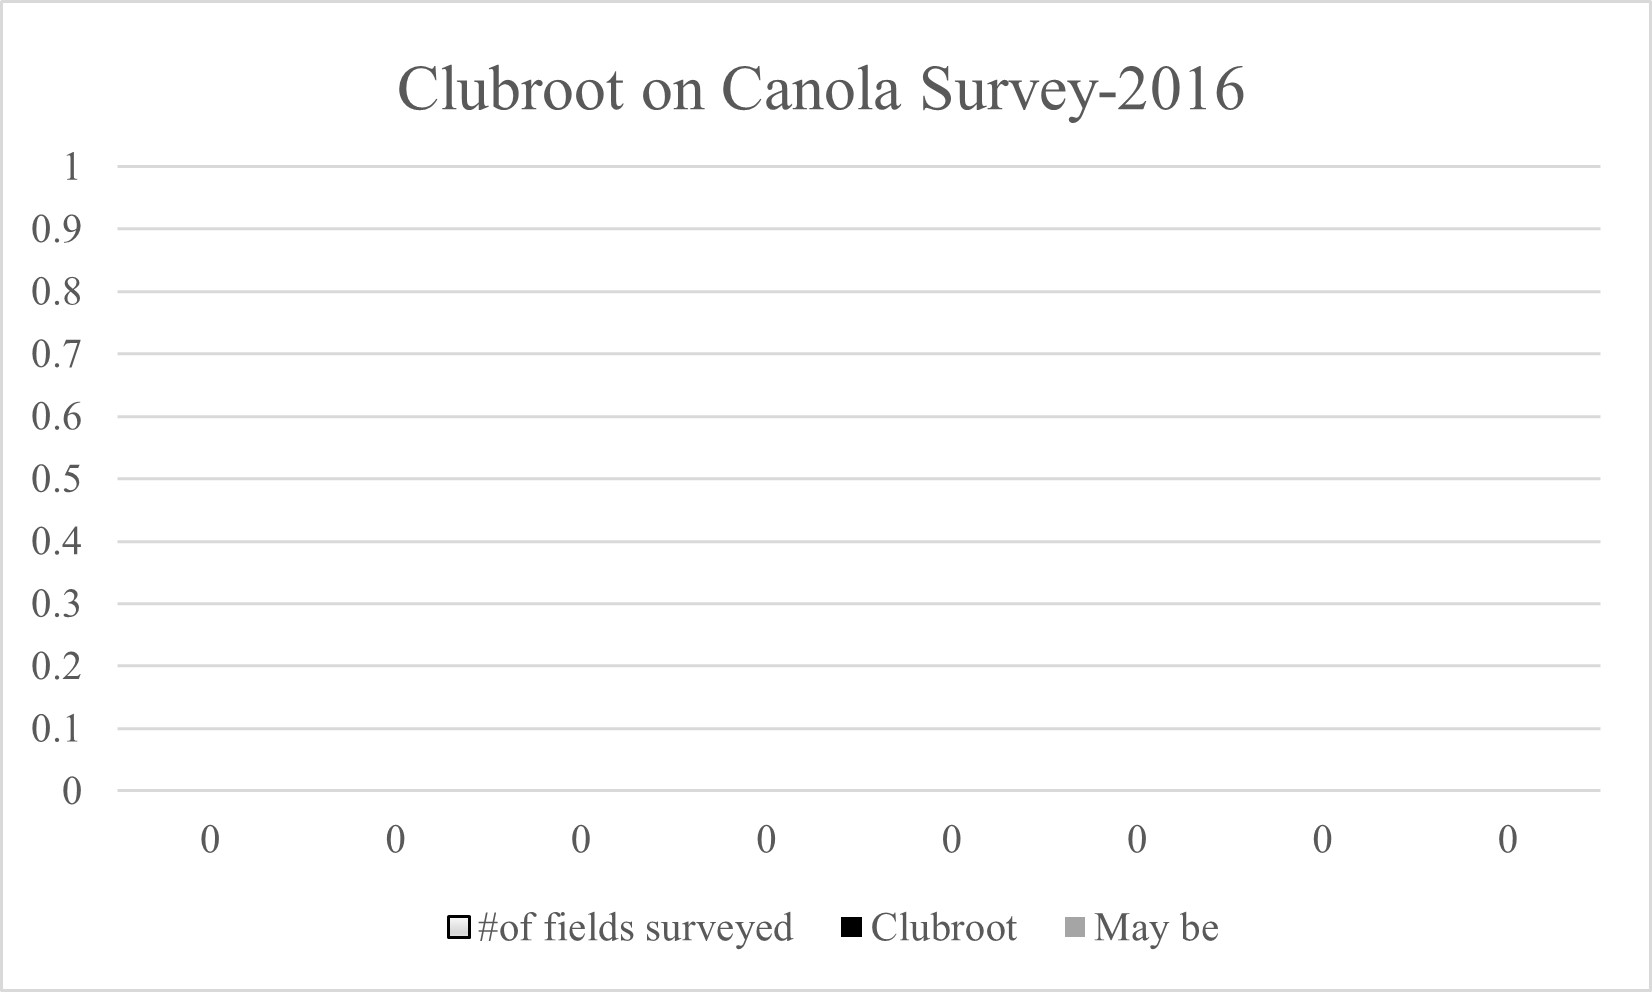 Fields surveyed in 2016 for prevalence of clubroot over 8 counties.